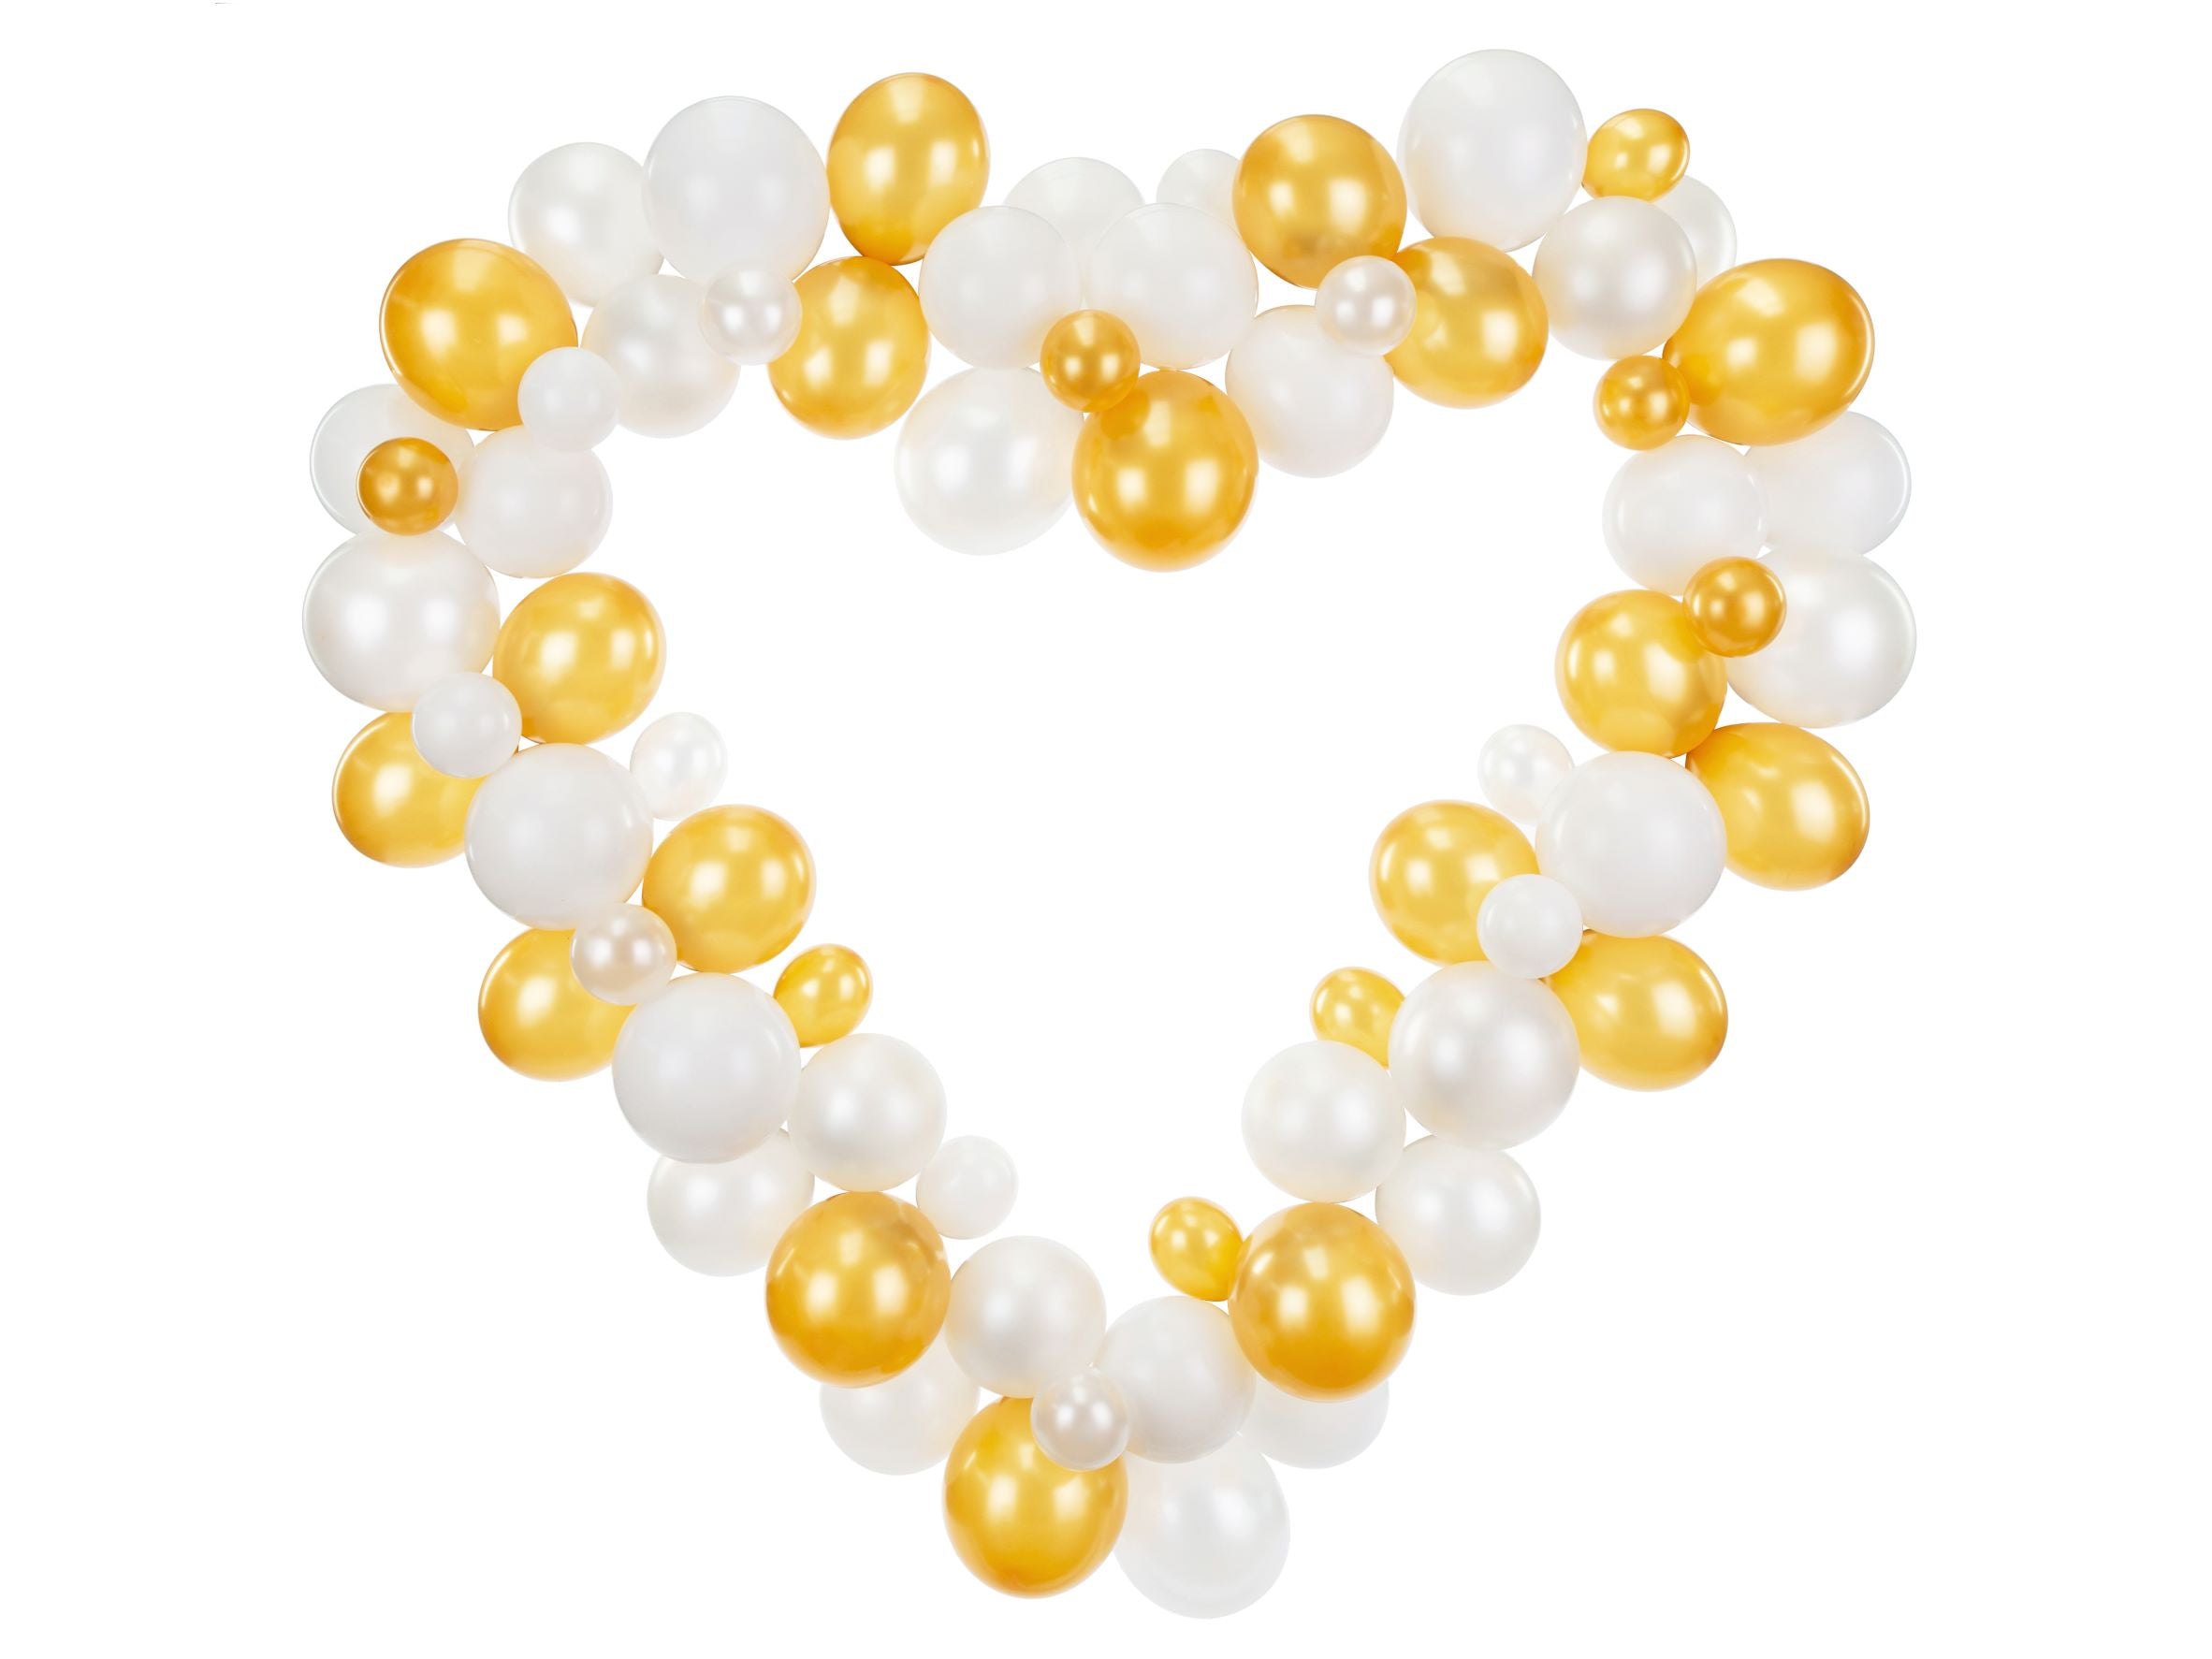 Heart Balloon Garland White and Gold, 200cm